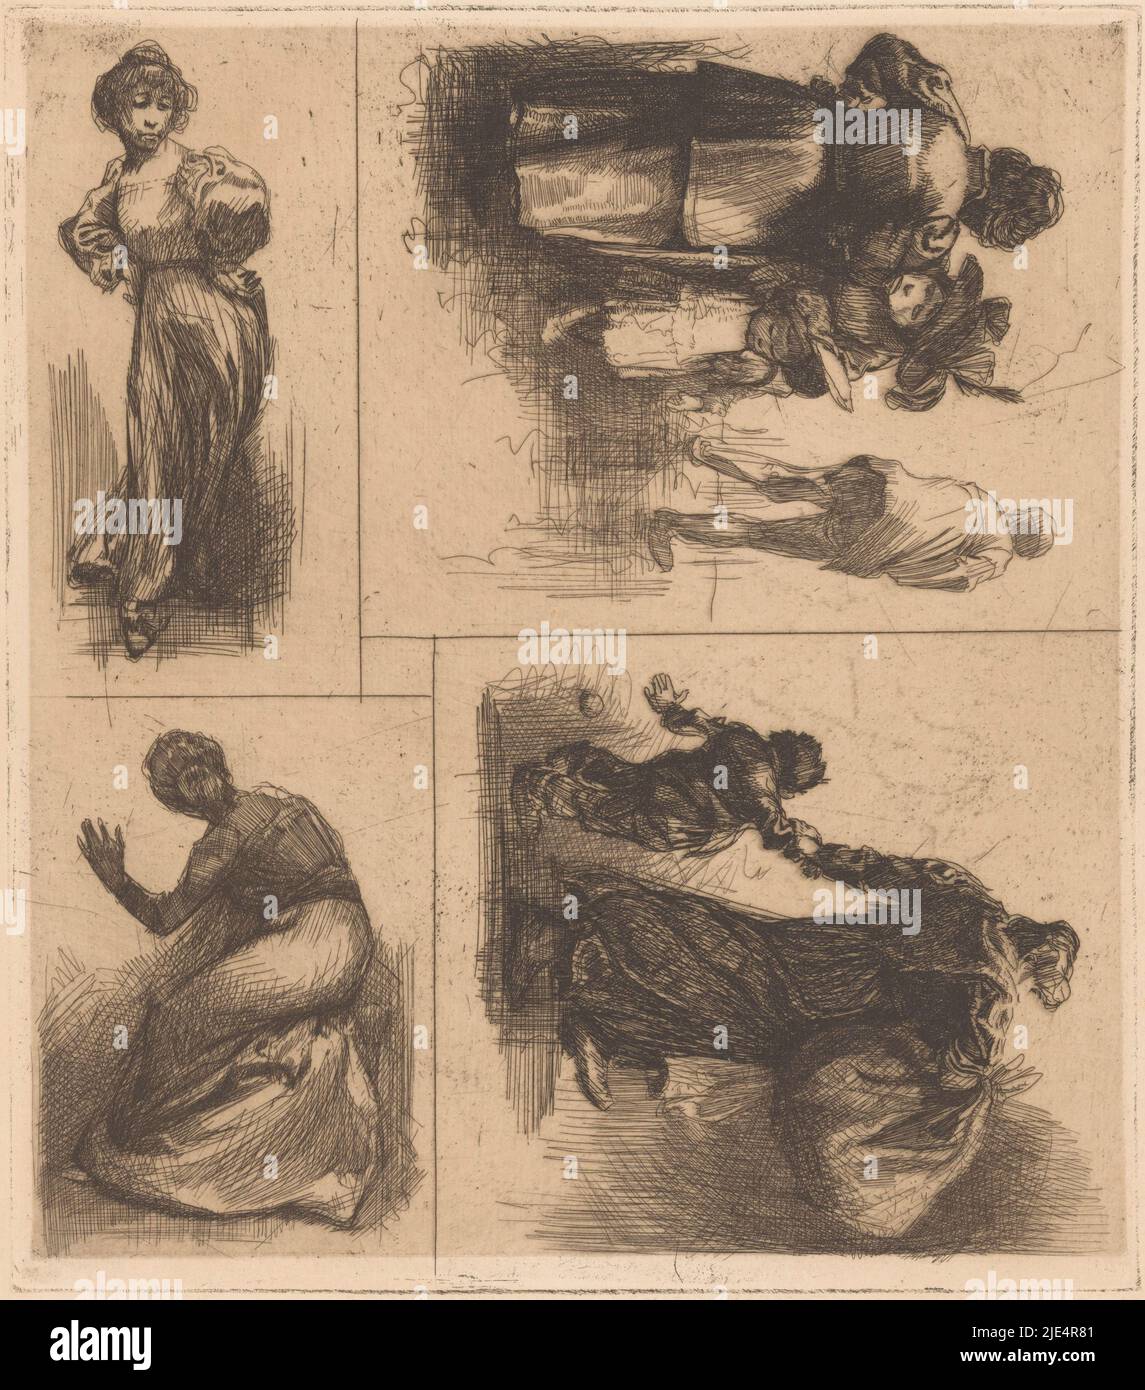 Sheet with four shows. Top right a woman with child on her arm. Bottom right a woman with bent back and knees. Bottom left a woman in dress. Top left two women with a child, Four scenes with human figures., print maker: Johannes Josephus Aarts, 1881 - 1934, paper, etching, h 225 mm × w 255 mm Stock Photo